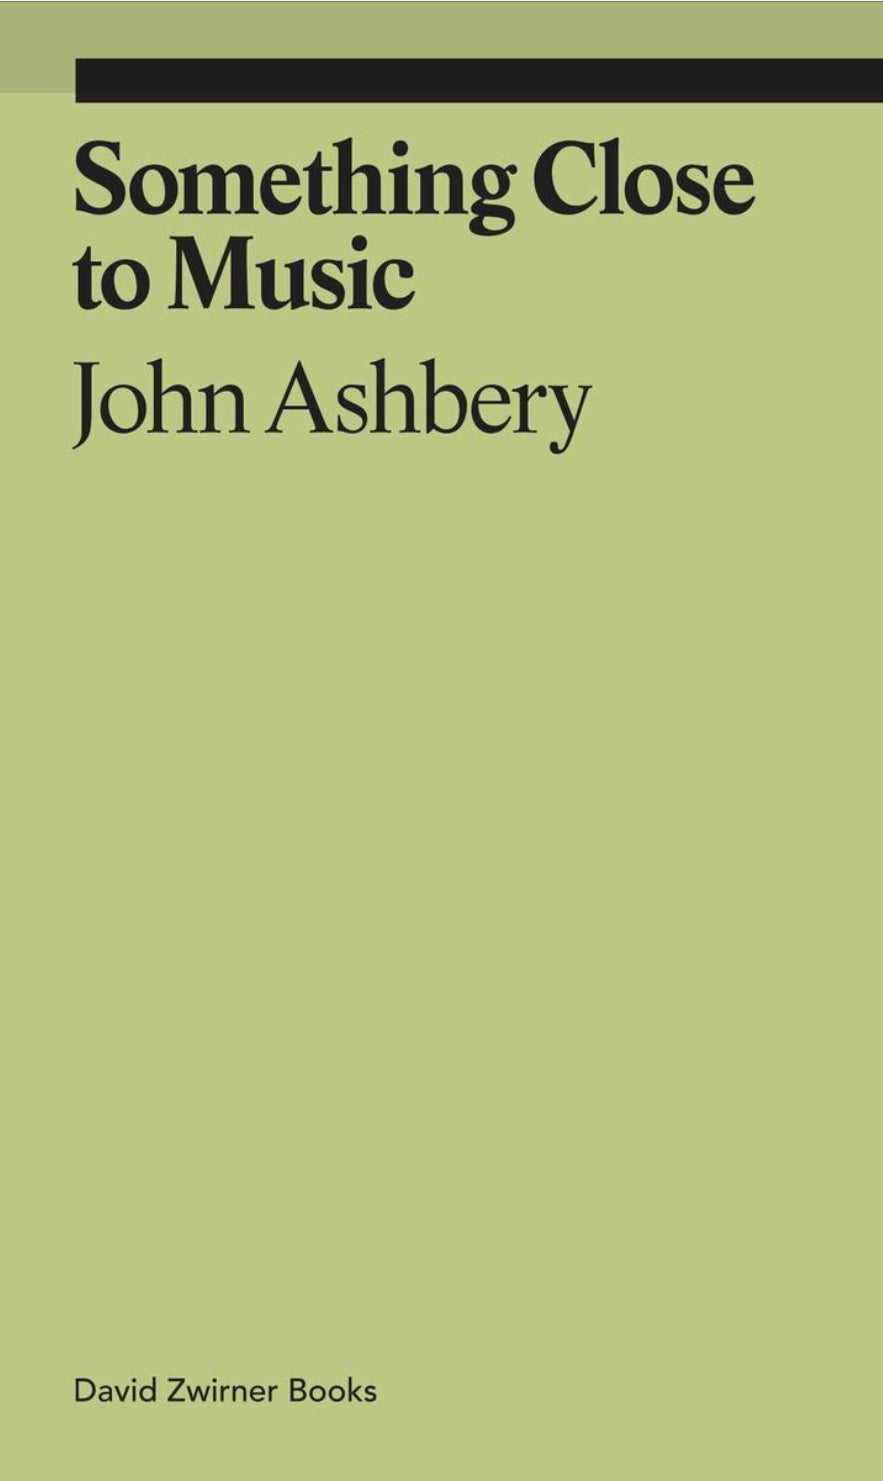 Basket Books: “Something Close to Music” by John Ashbery